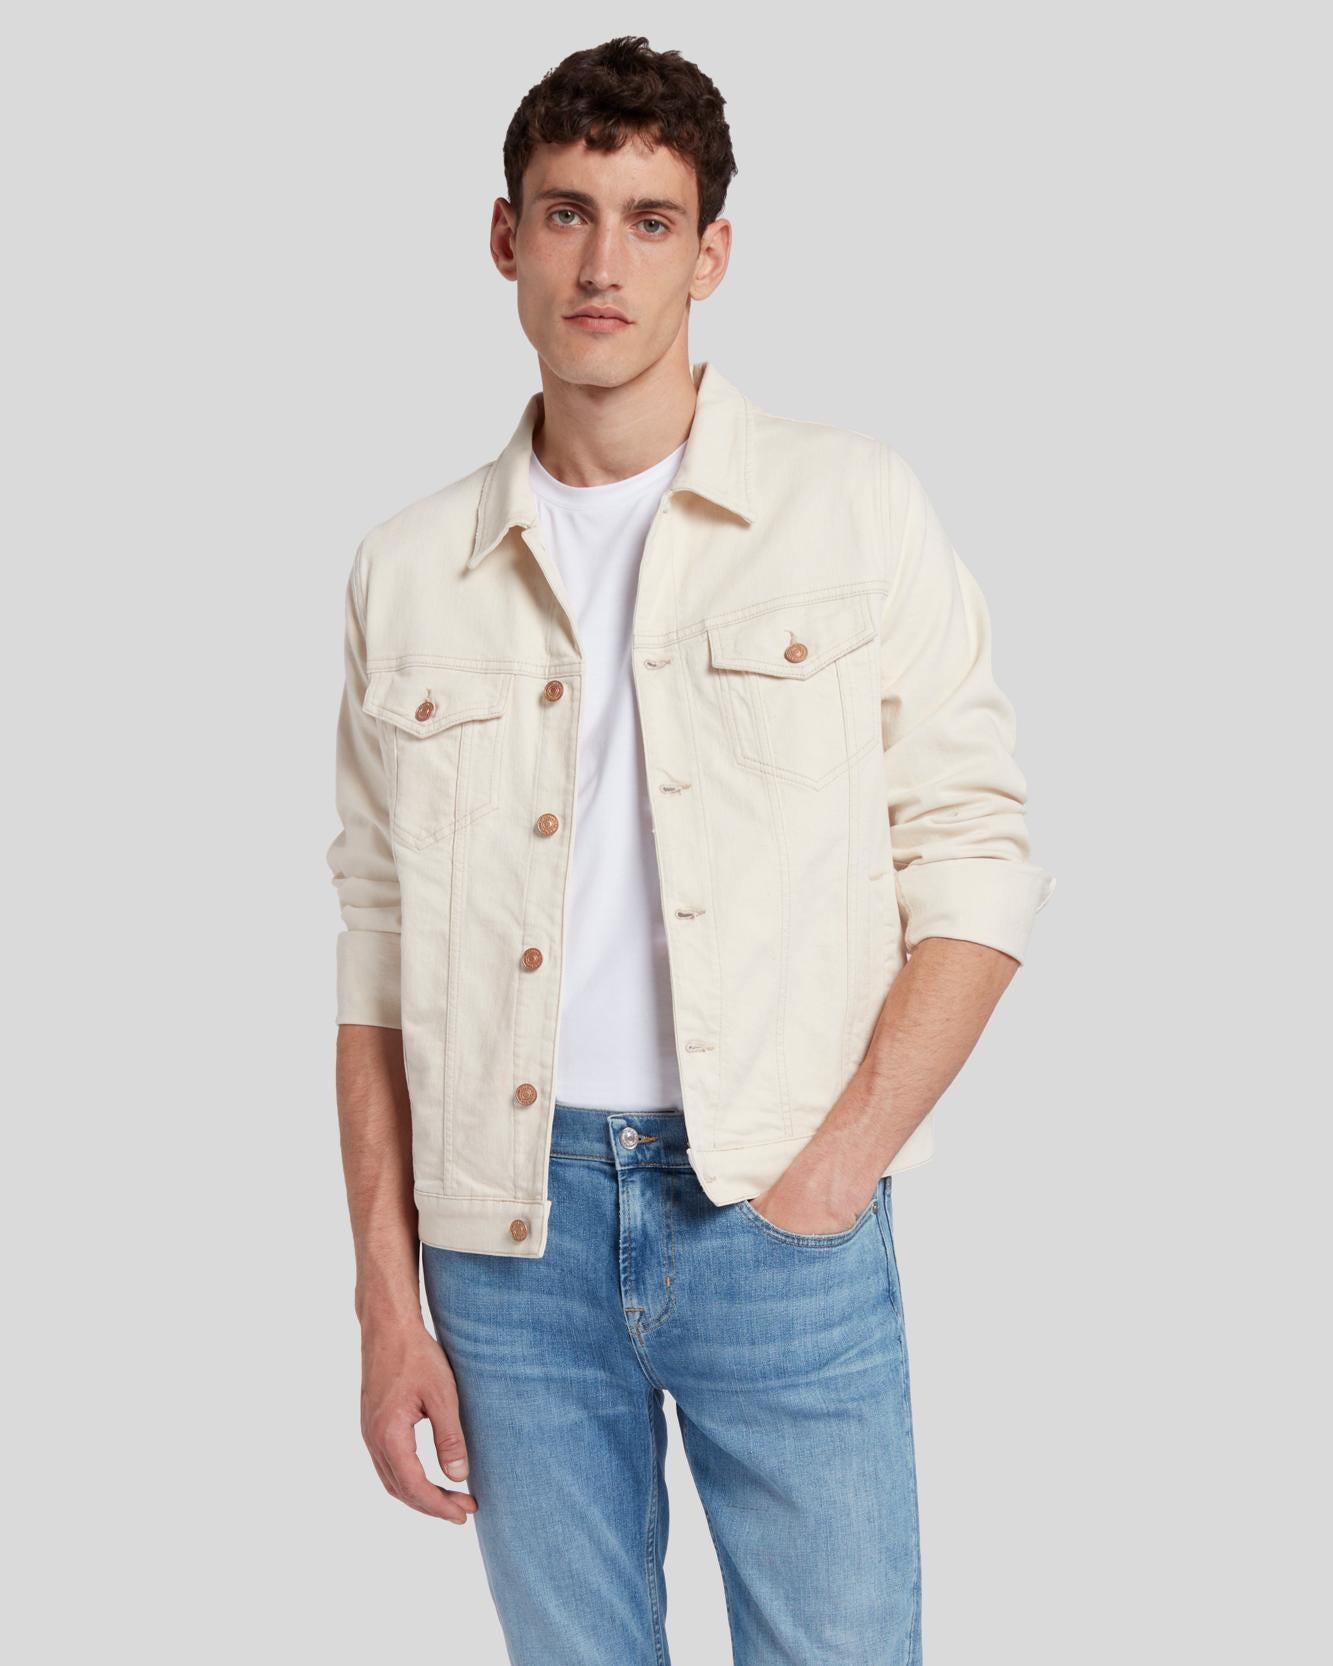 Men's Jackets & Outerwear - Designer Coats | 7 For All Mankind